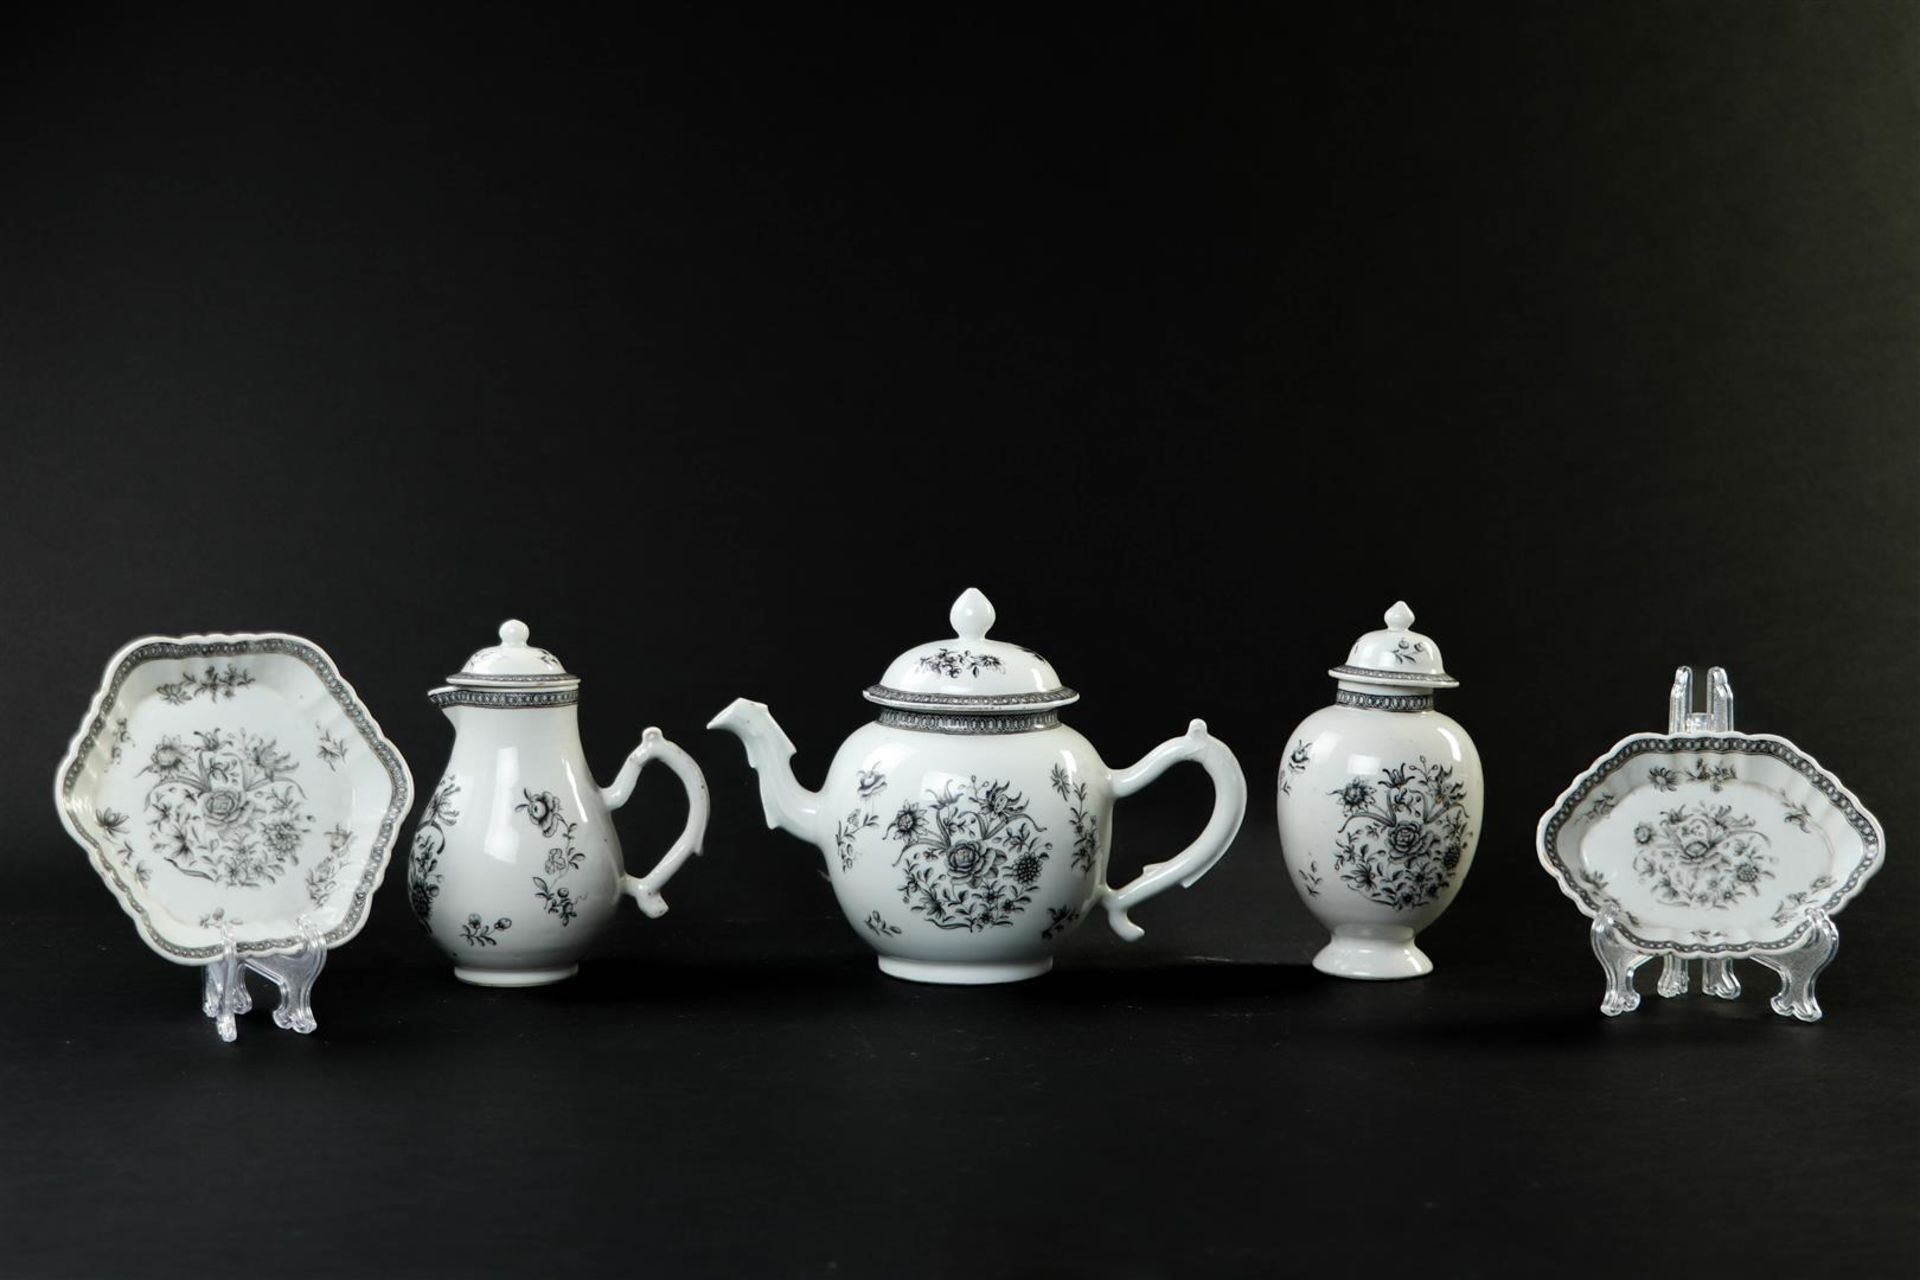 An Encre de Chine tableware set consisting of a teapot, milk jug, tea caddy, patty pan and spoon tra